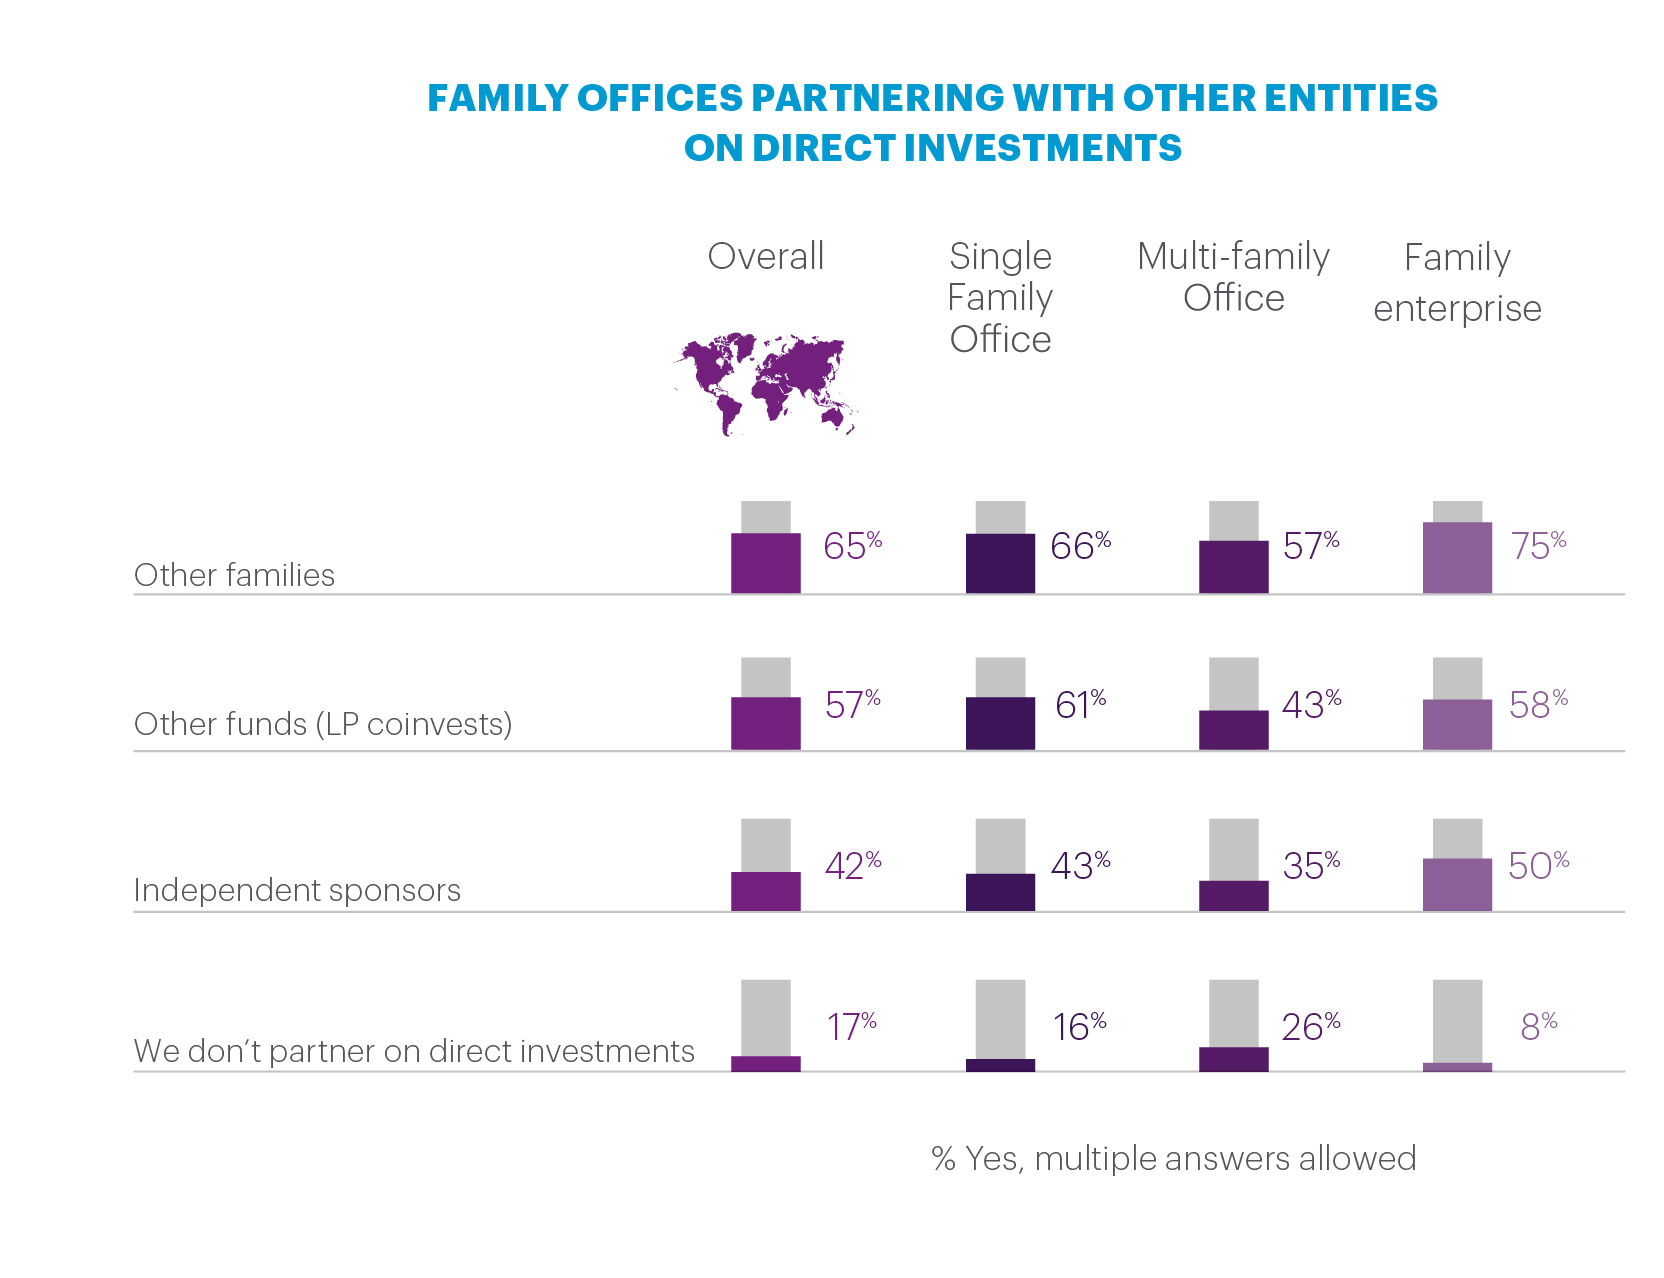 Percentages and list of FOs partnering with other entities on direct investments